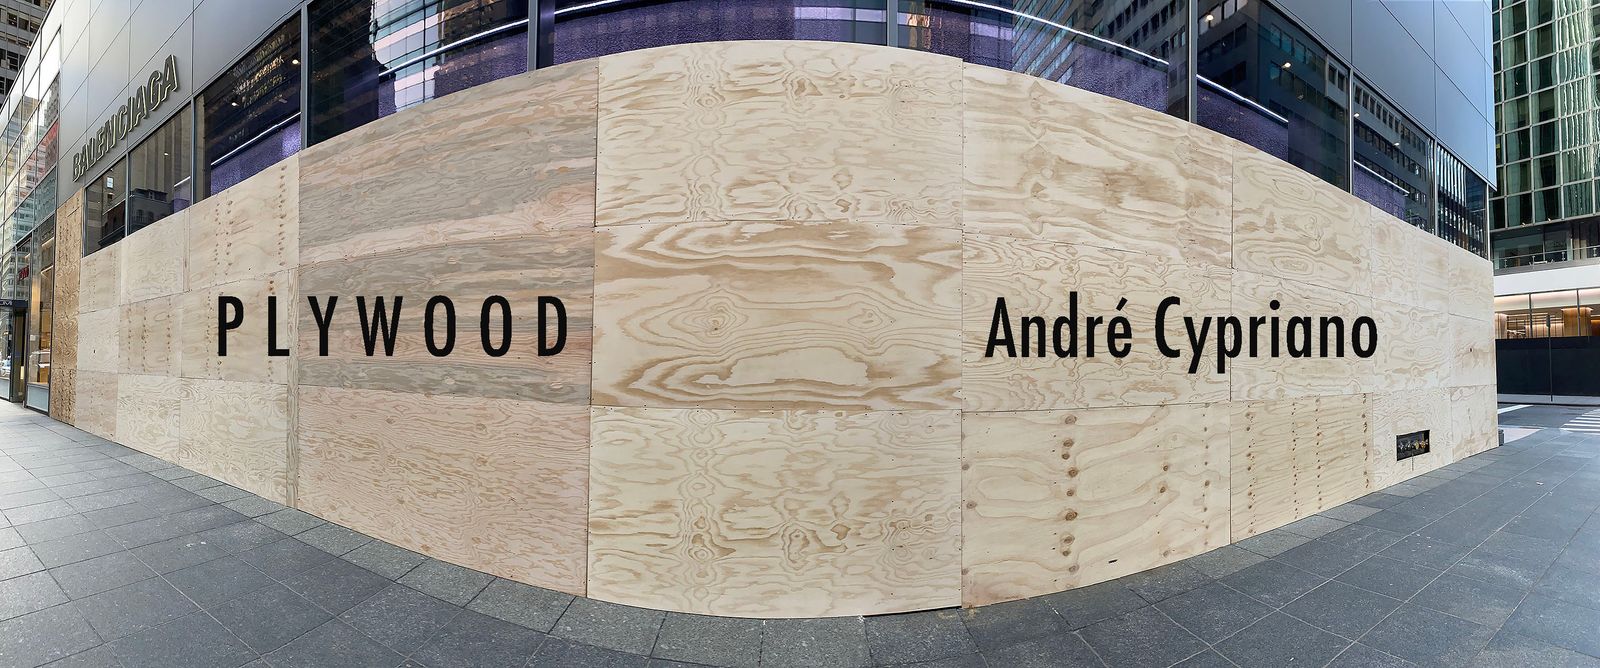 Plywood by Andre Cypriano title.jpg